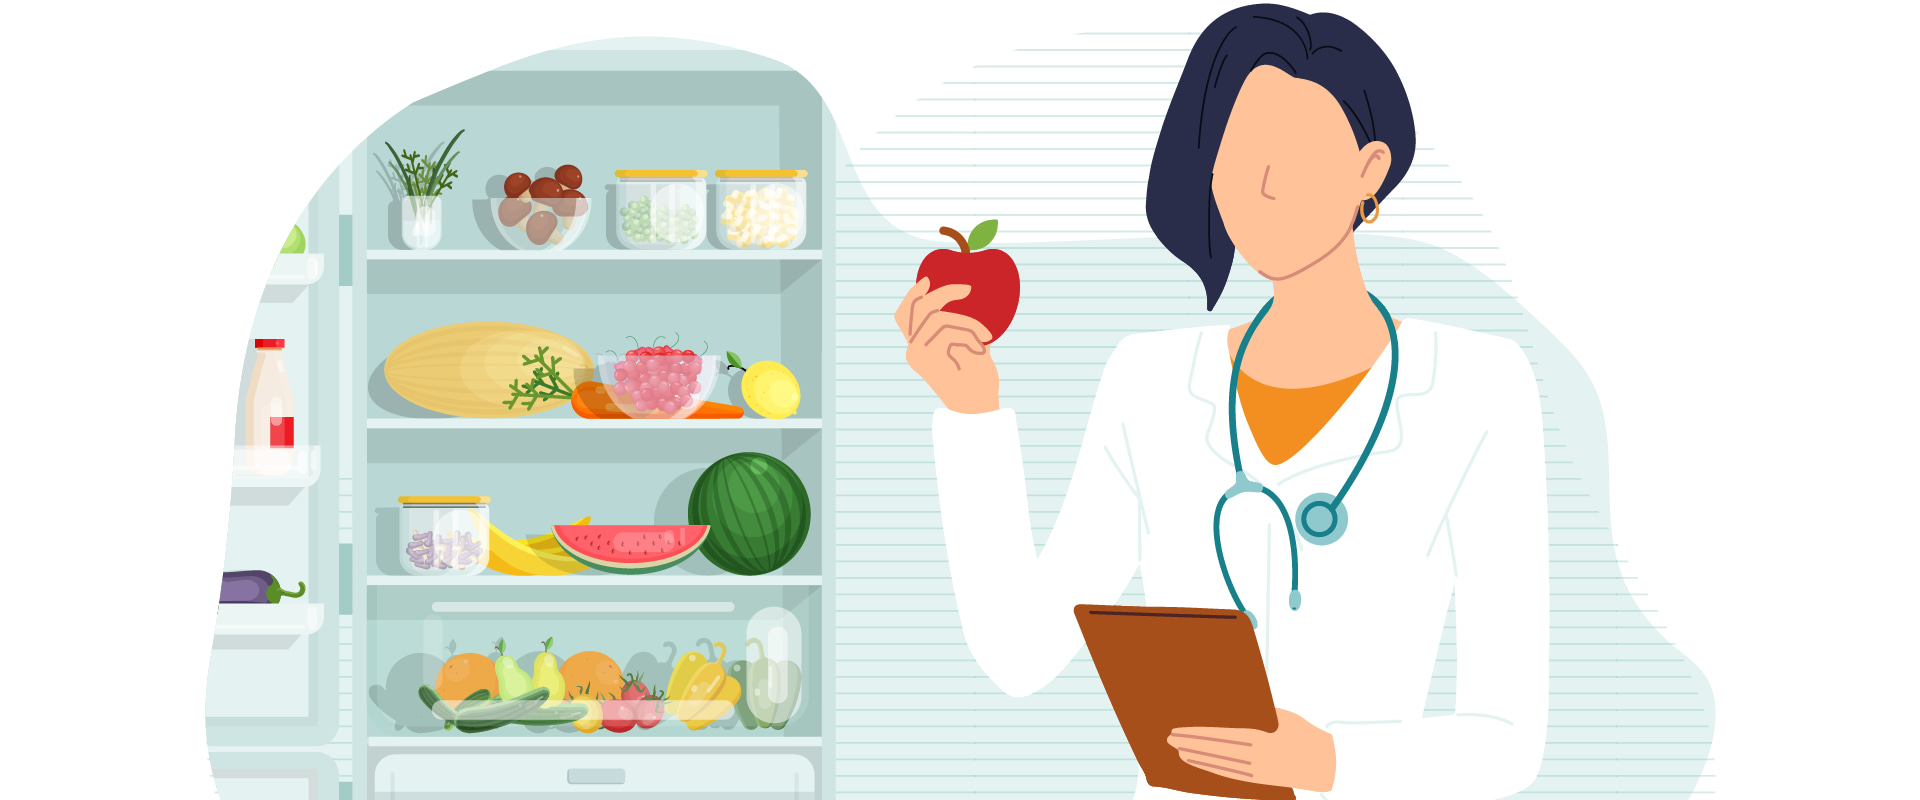 Who is clinical nutritionist?